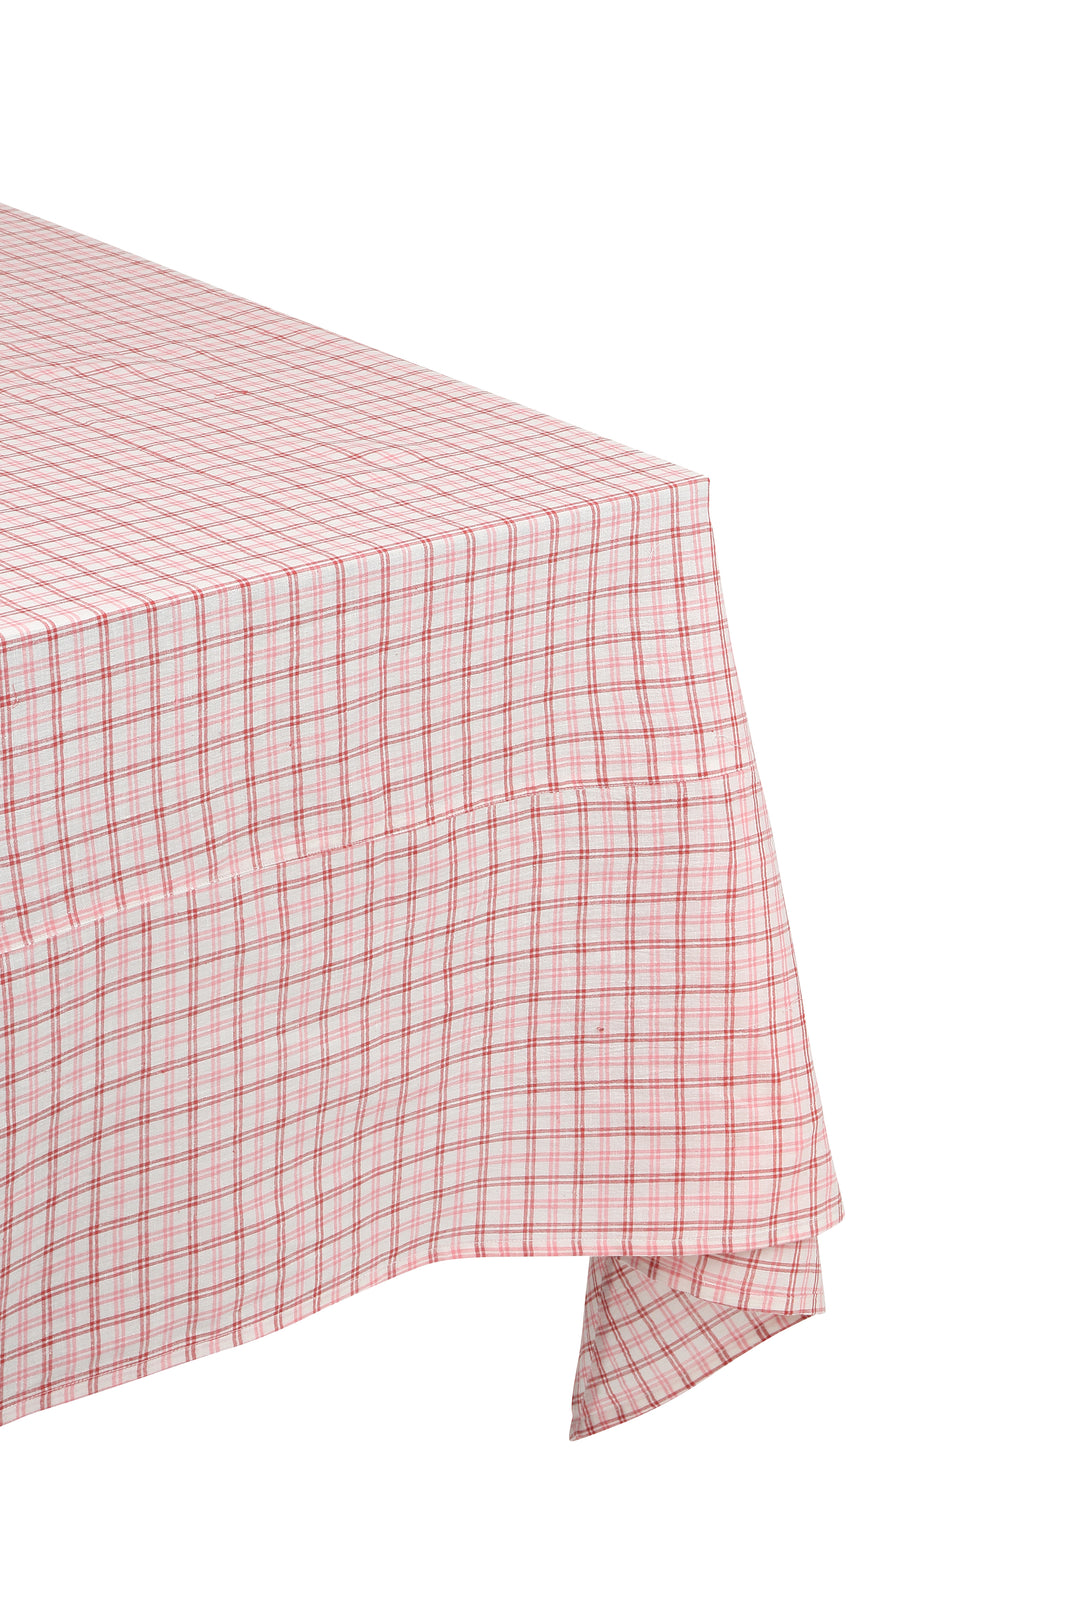 Lipstick Bise Tablecloth